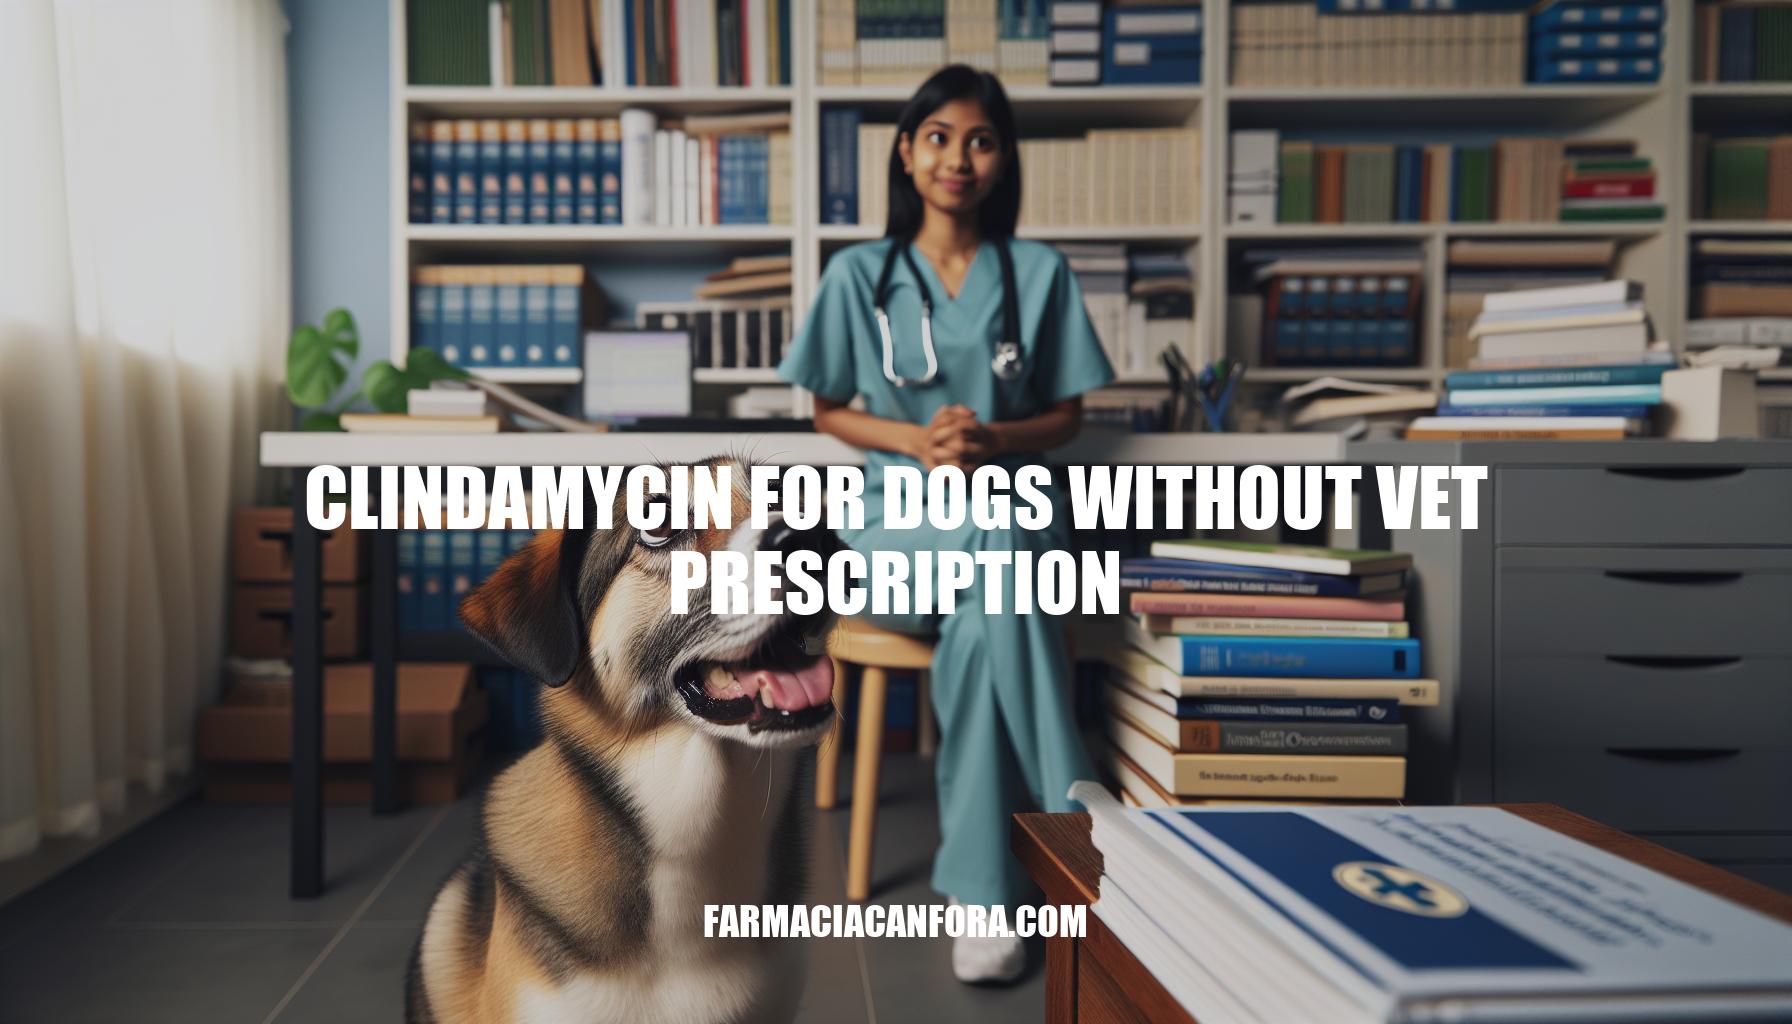 Clindamycin for Dogs Without Vet Prescription: Risks and Guidelines